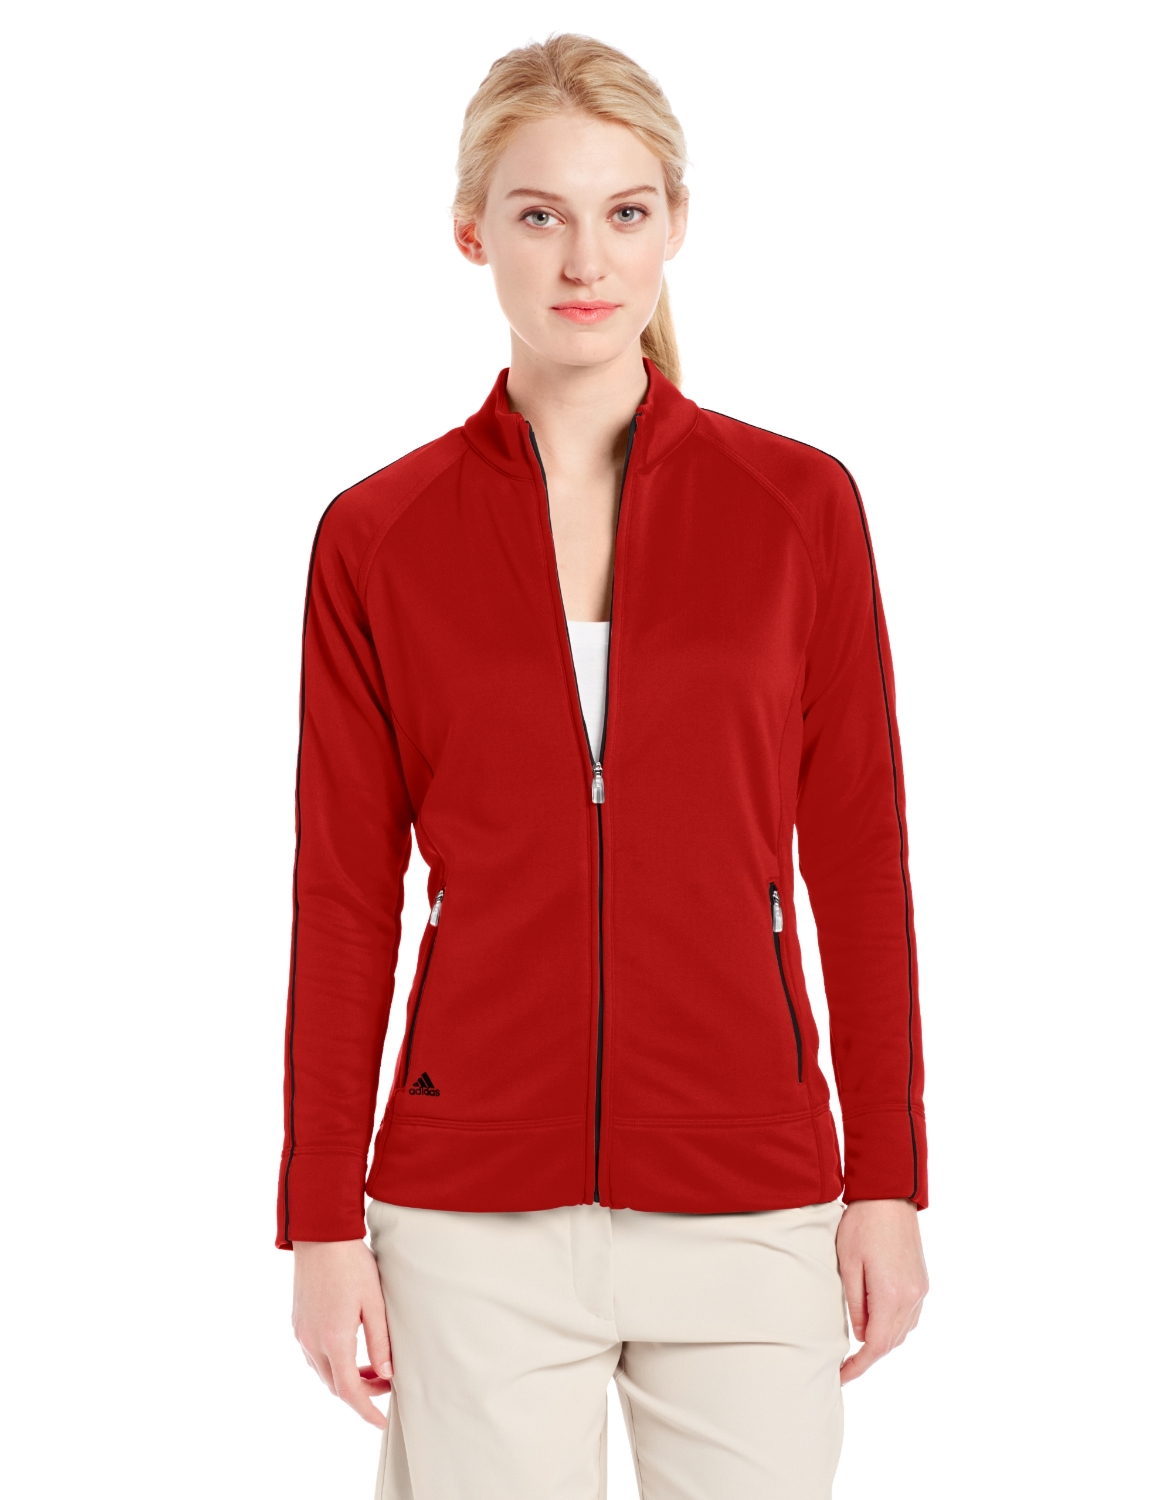 Adidas Womens 3-Stripe Piped Jackets